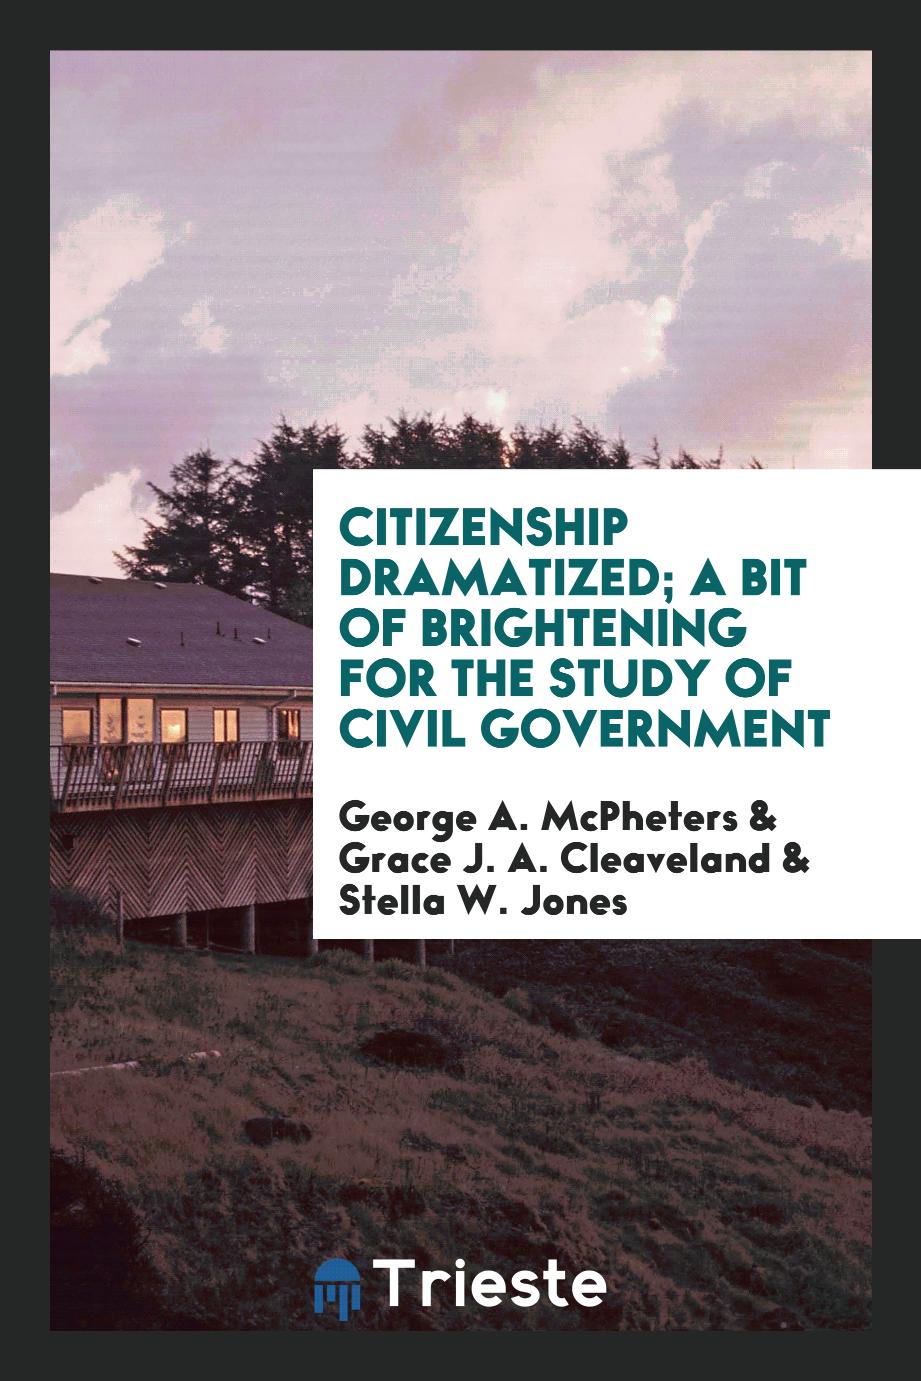 Citizenship dramatized; a bit of brightening for the study of civil government